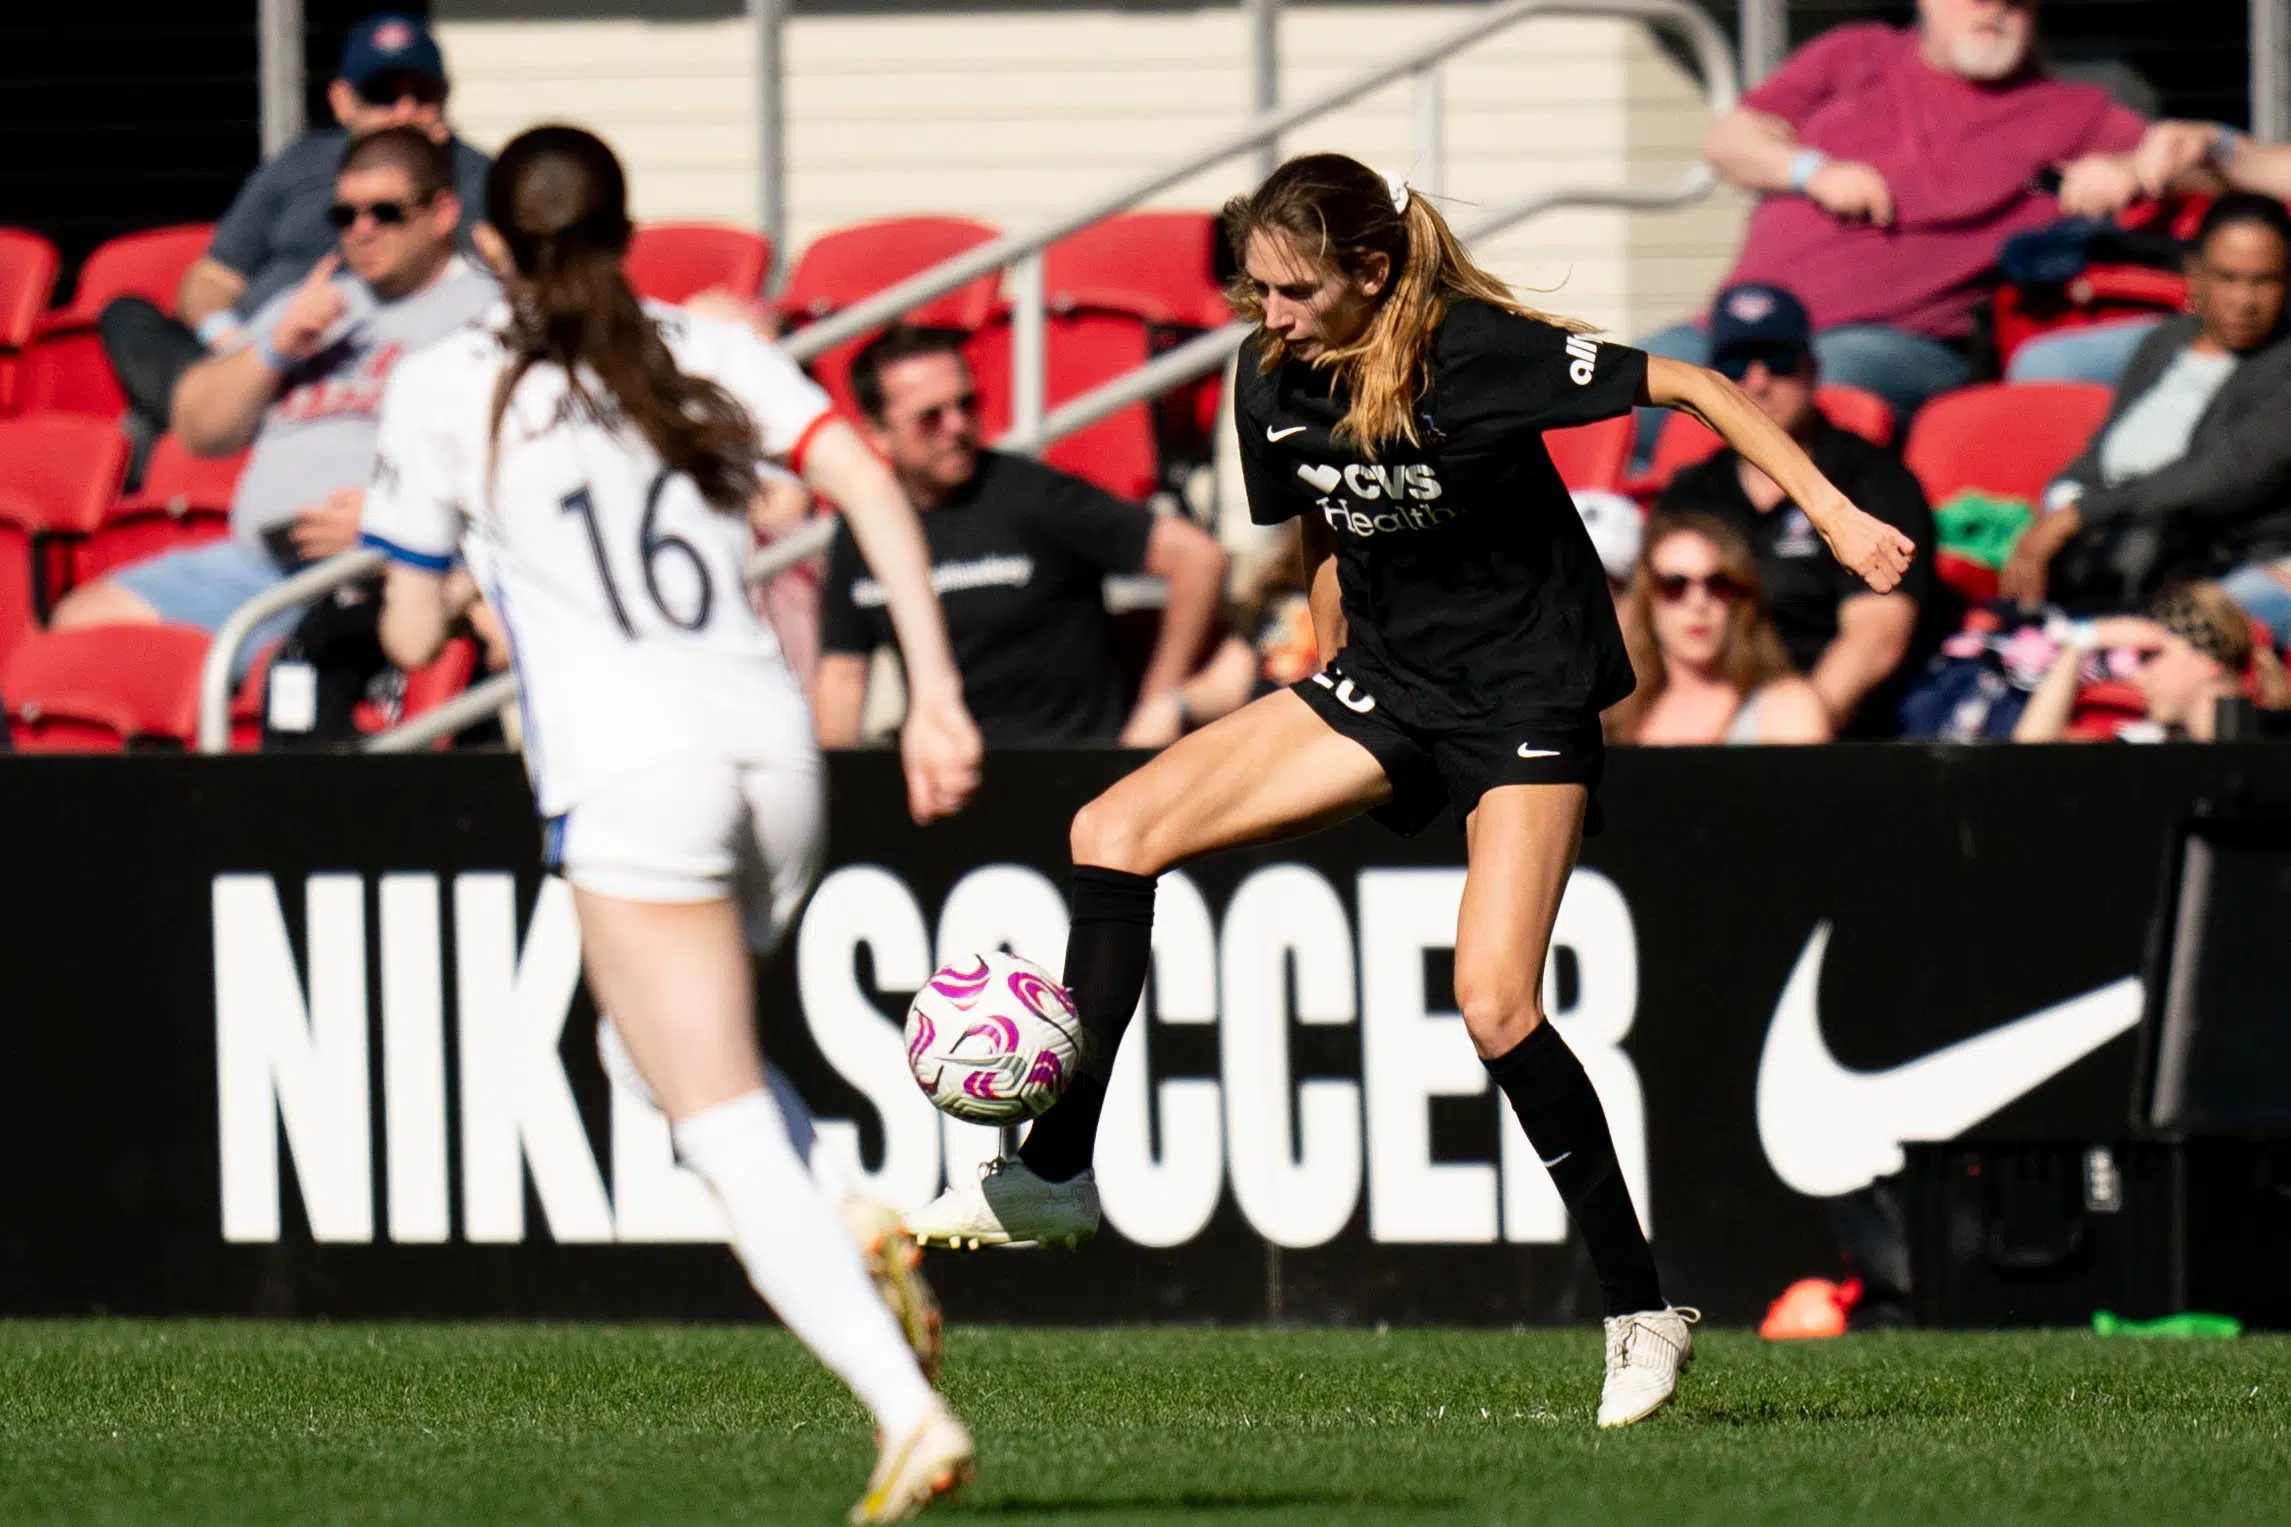 Paige Metayer in a black jersey, black shorts, black socks, and white cleats traps a soccer ball. In the background, fans watch from red seats.